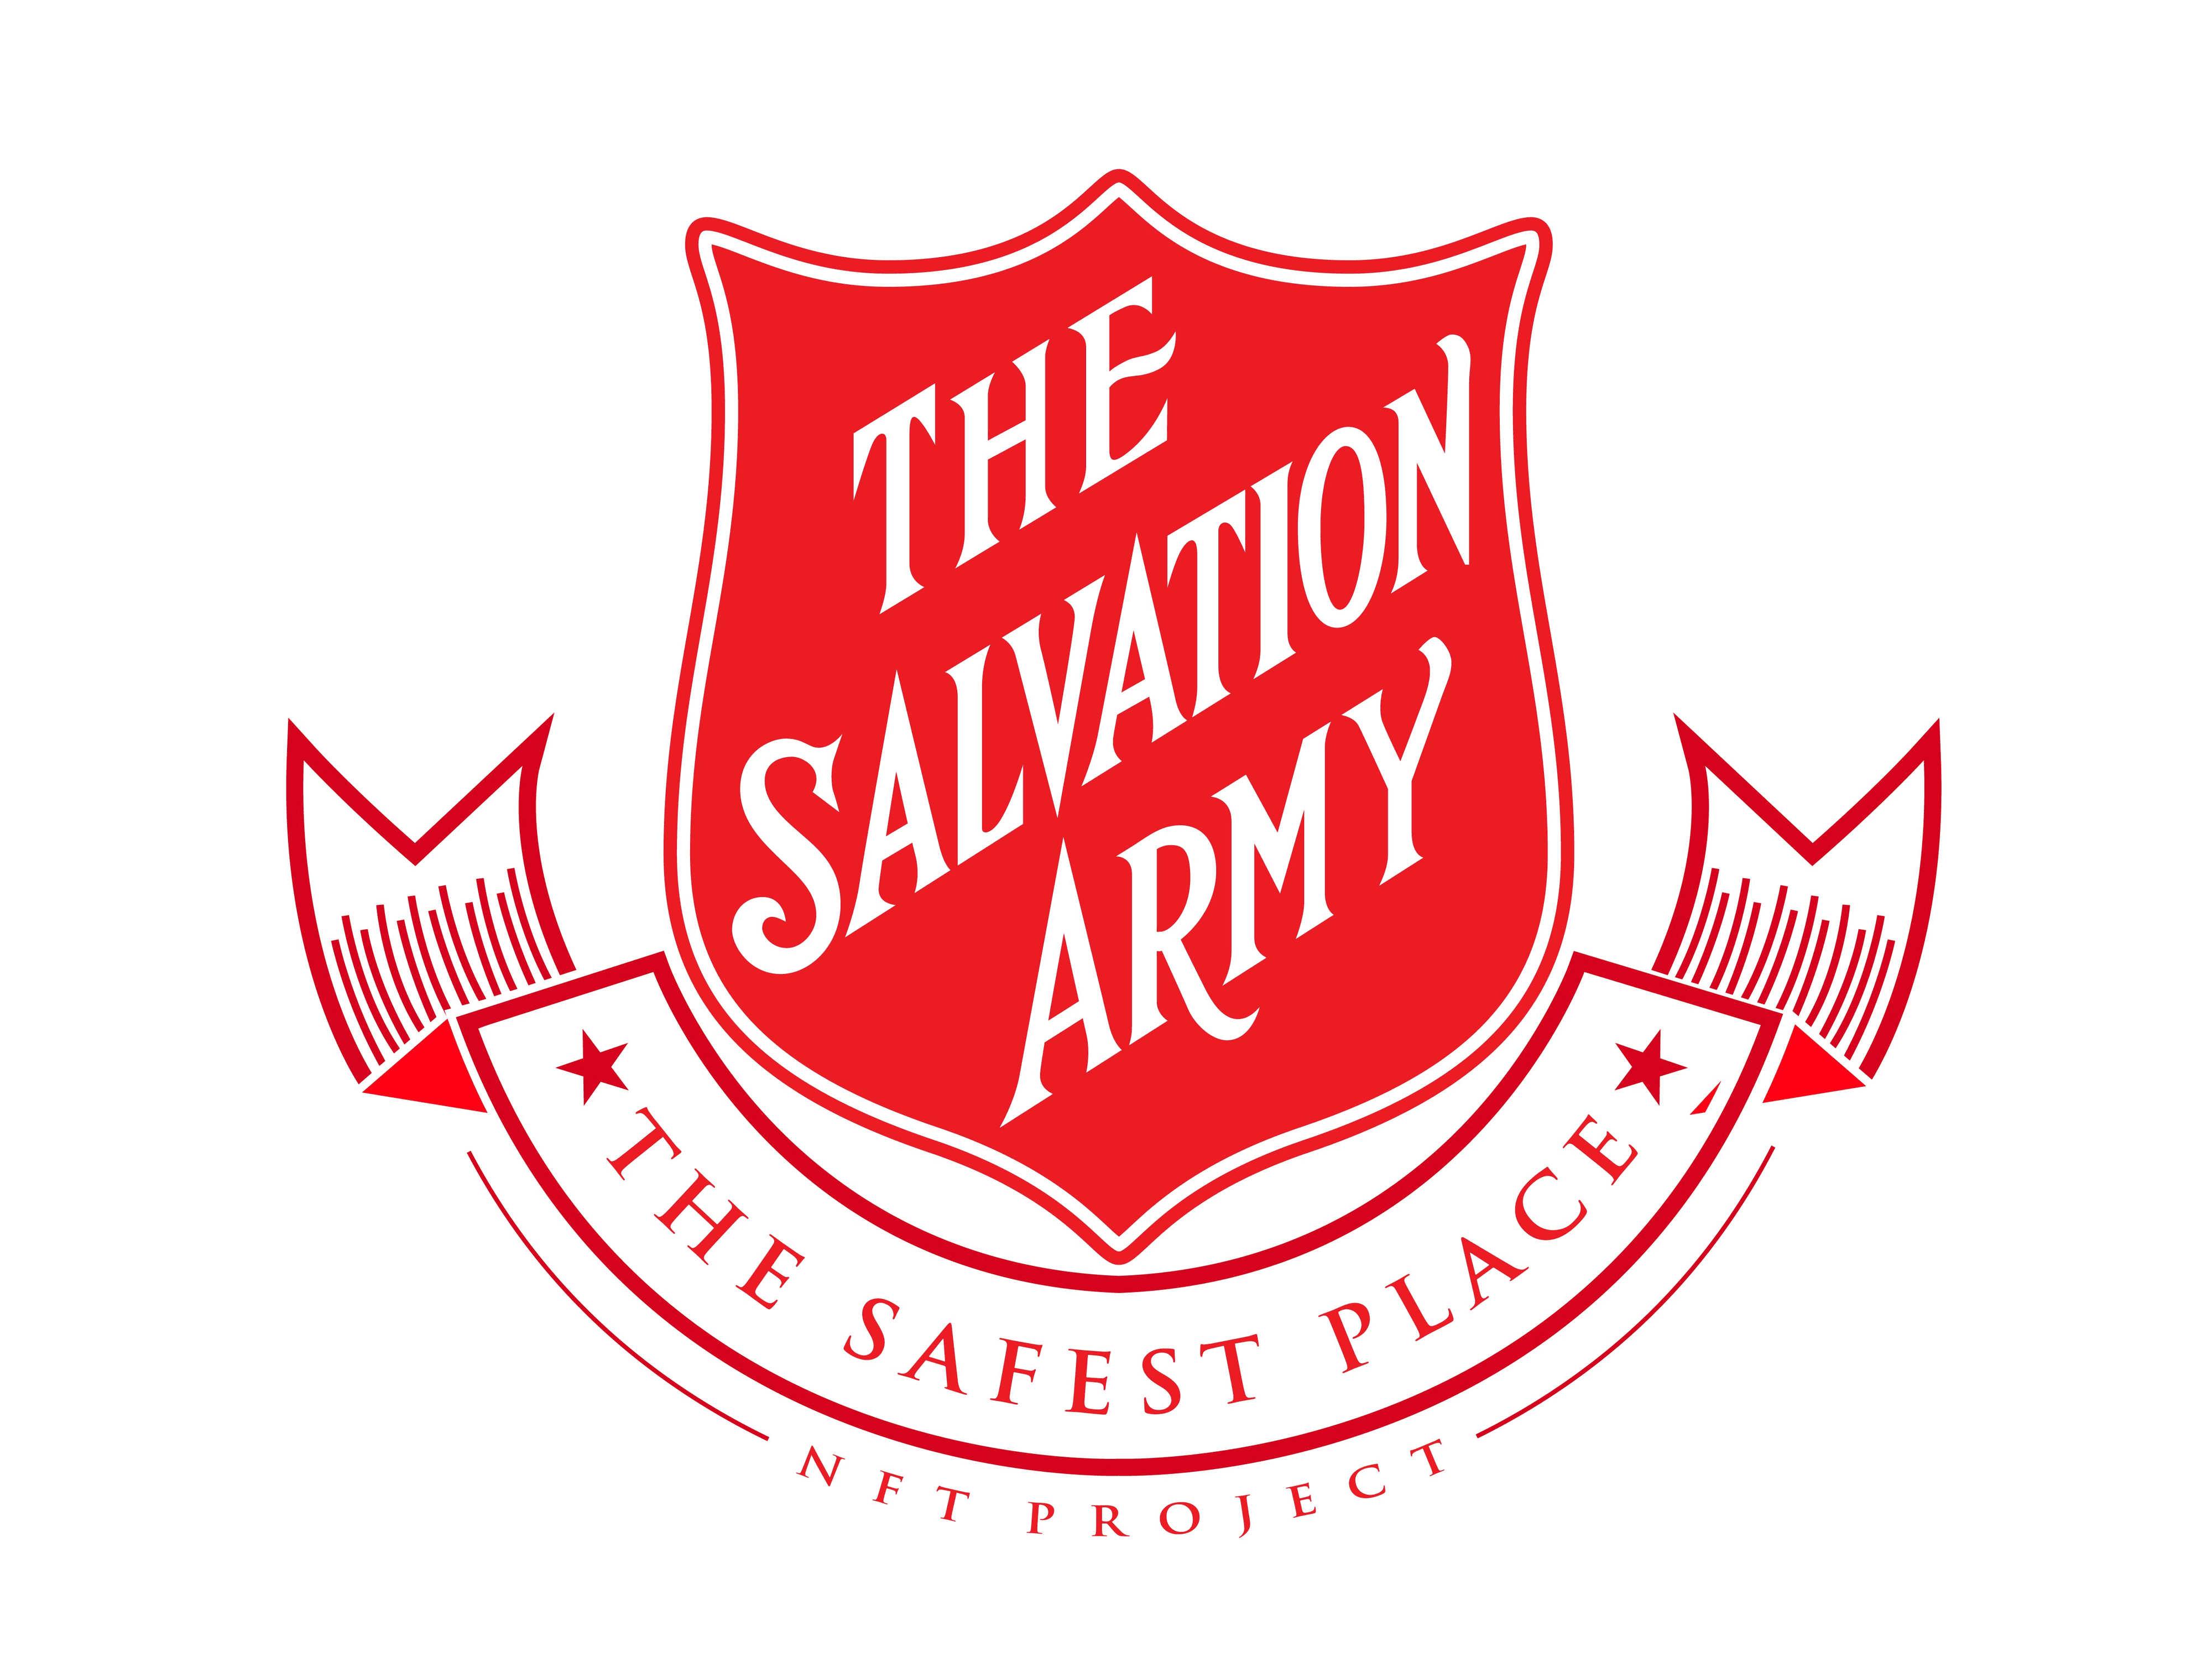 The Safest Place NFT Project (The Salvation Army)